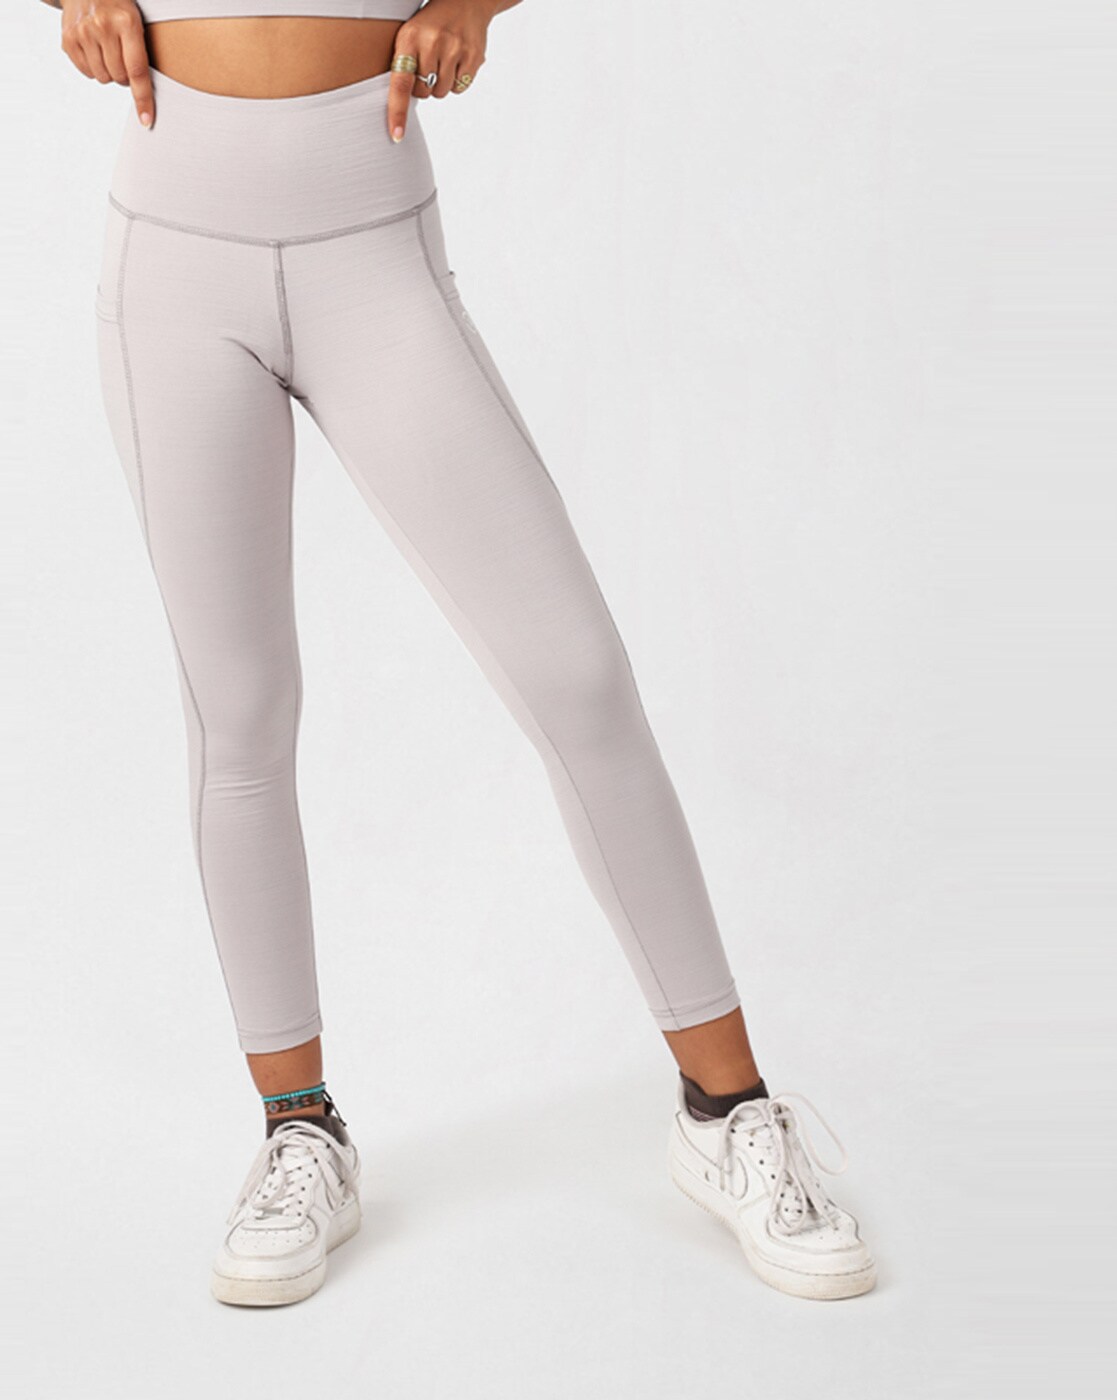 Kica Tights - Buy Kica Tights online in India